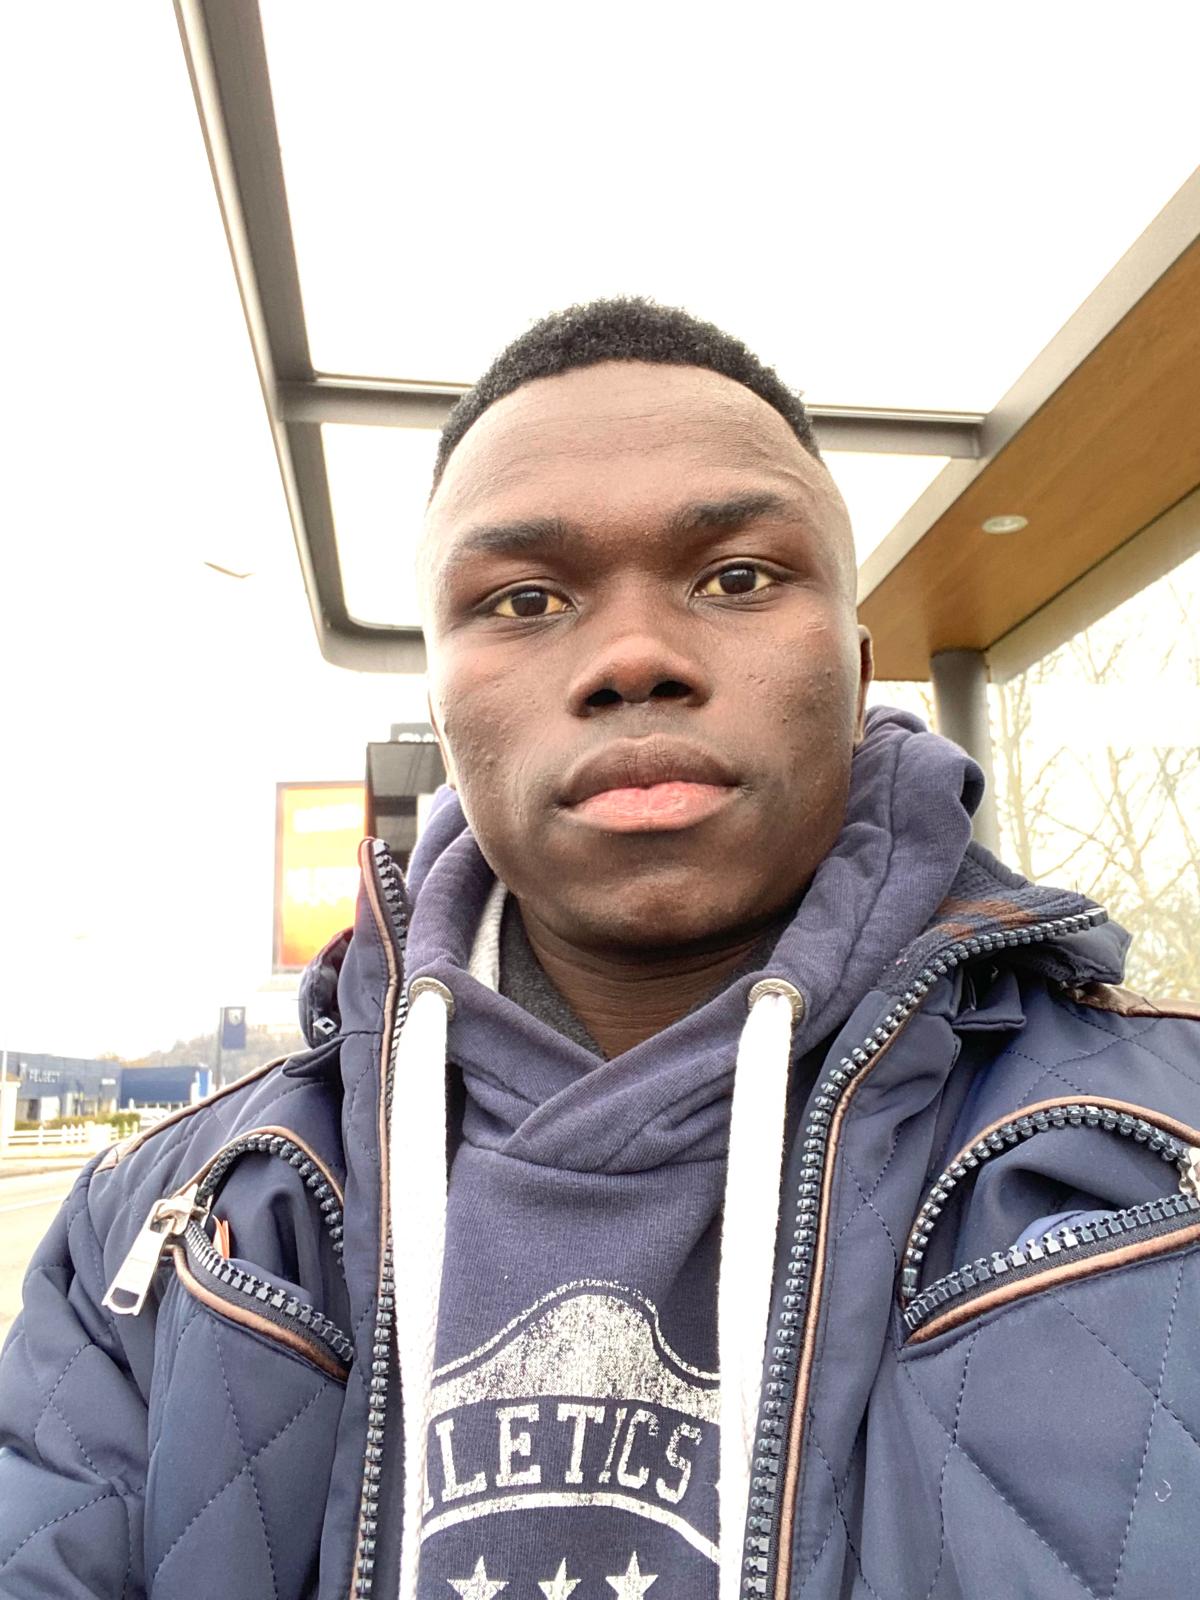 A horrifying account of how a brave African student (Arc de Gloire Mapouka) survived the Russian bombing of Ukraine in the most challenging moments of his life as an international student from the Central African Republic.  